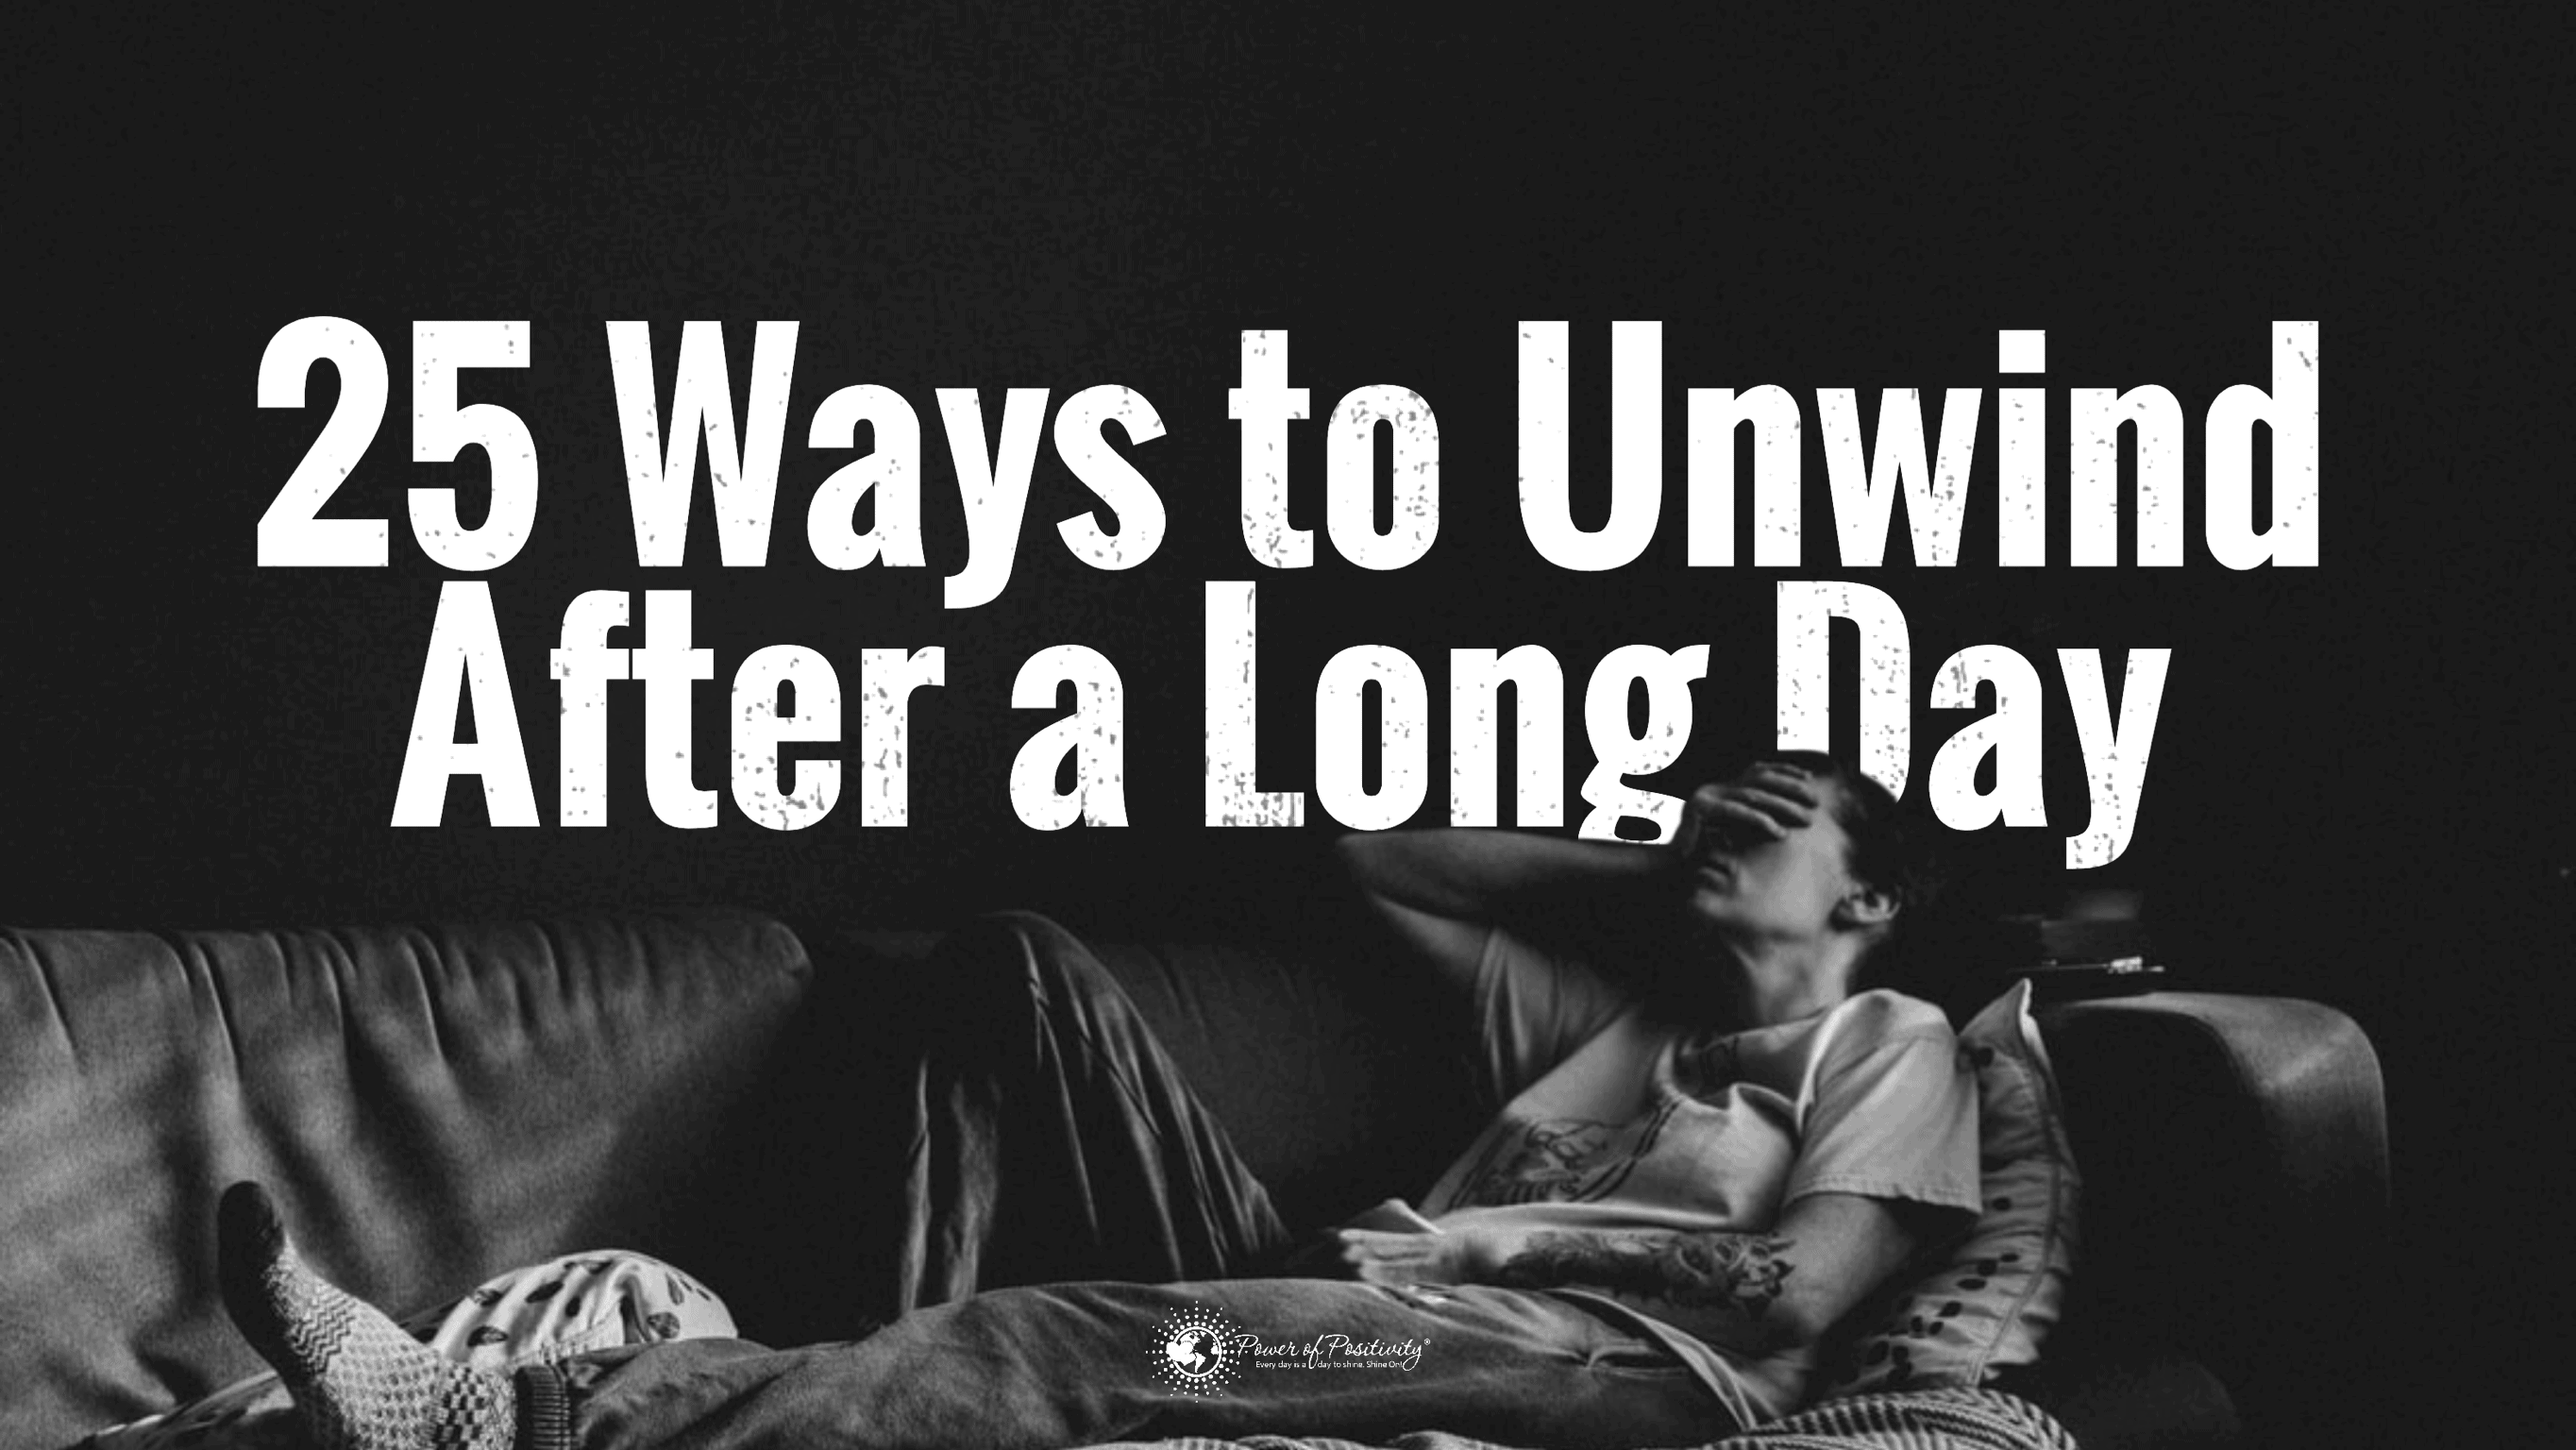 25 Positive Ways to Unwind After a Long Day